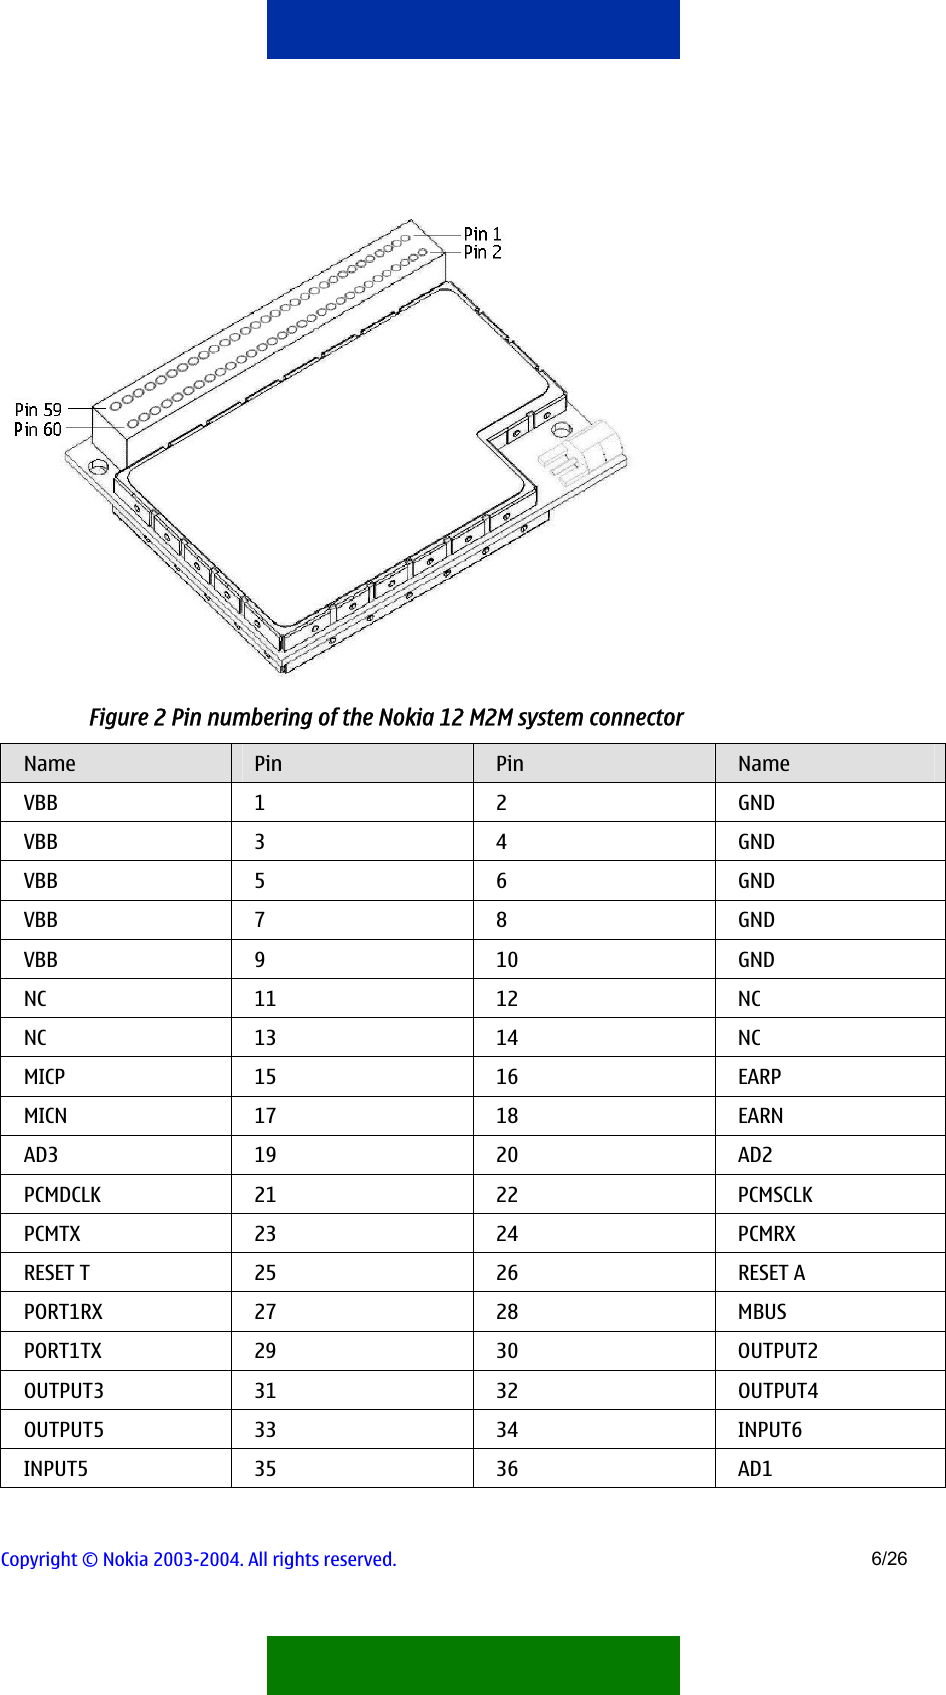     Figure 2 Pin numbering of the Nokia 12 M2M system connector  Name  Pin  Pin  Name VBB 1 2 GND VBB  3 4 GND VBB 5 6 GND VBB 7 8 GND VBB 9  10  GND NC 11 12 NC NC 13 14 NC MICP 15 16 EARP MICN 17 18 EARN AD3 19 20 AD2 PCMDCLK 21 22 PCMSCLK PCMTX 23 24 PCMRX RESET T 25 26 RESET A PORT1RX 27 28 MBUS PORT1TX 29 30 OUTPUT2 OUTPUT3 31 32 OUTPUT4 OUTPUT5 33 34 INPUT6 INPUT5 35 36 AD1 Copyright © Nokia 2003-2004. All rights reserved.   6/26  